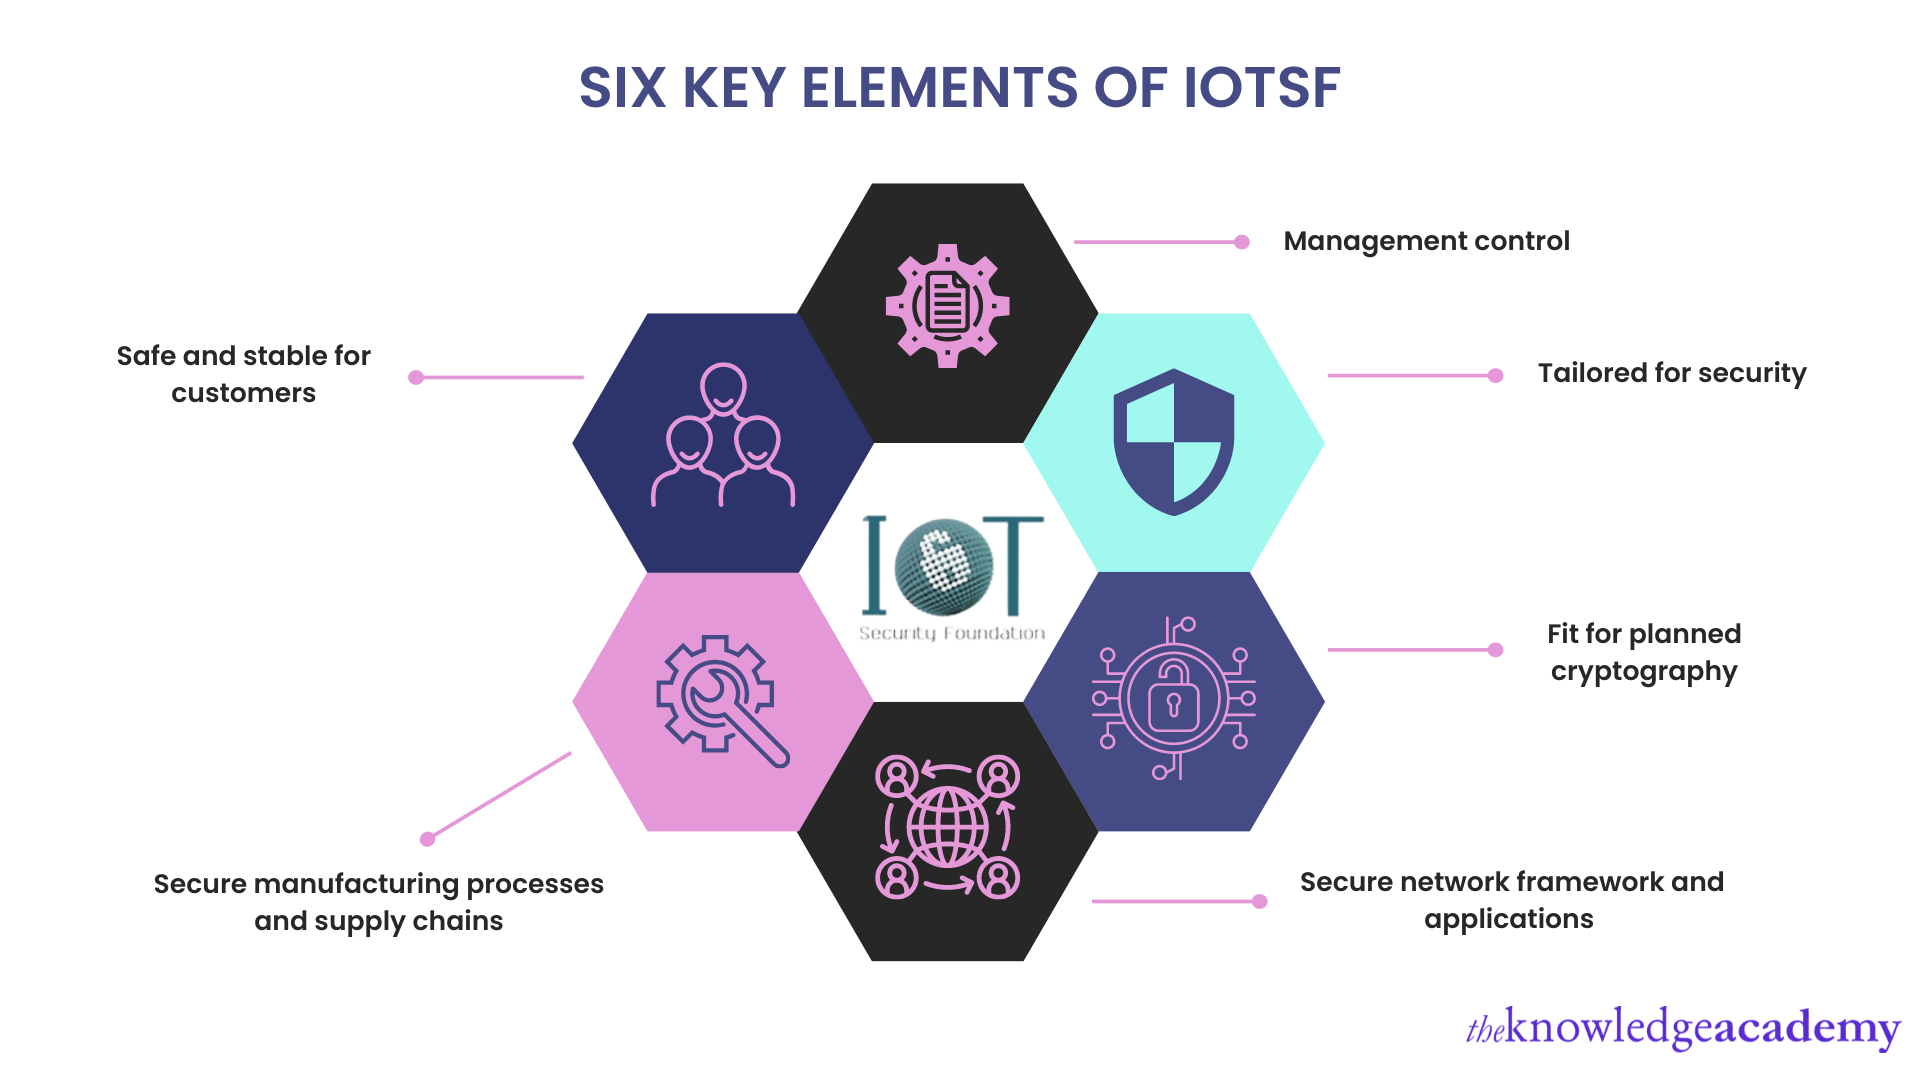 Internet of Things (IoT) Security Foundation (IoTSF) security compliance Framework